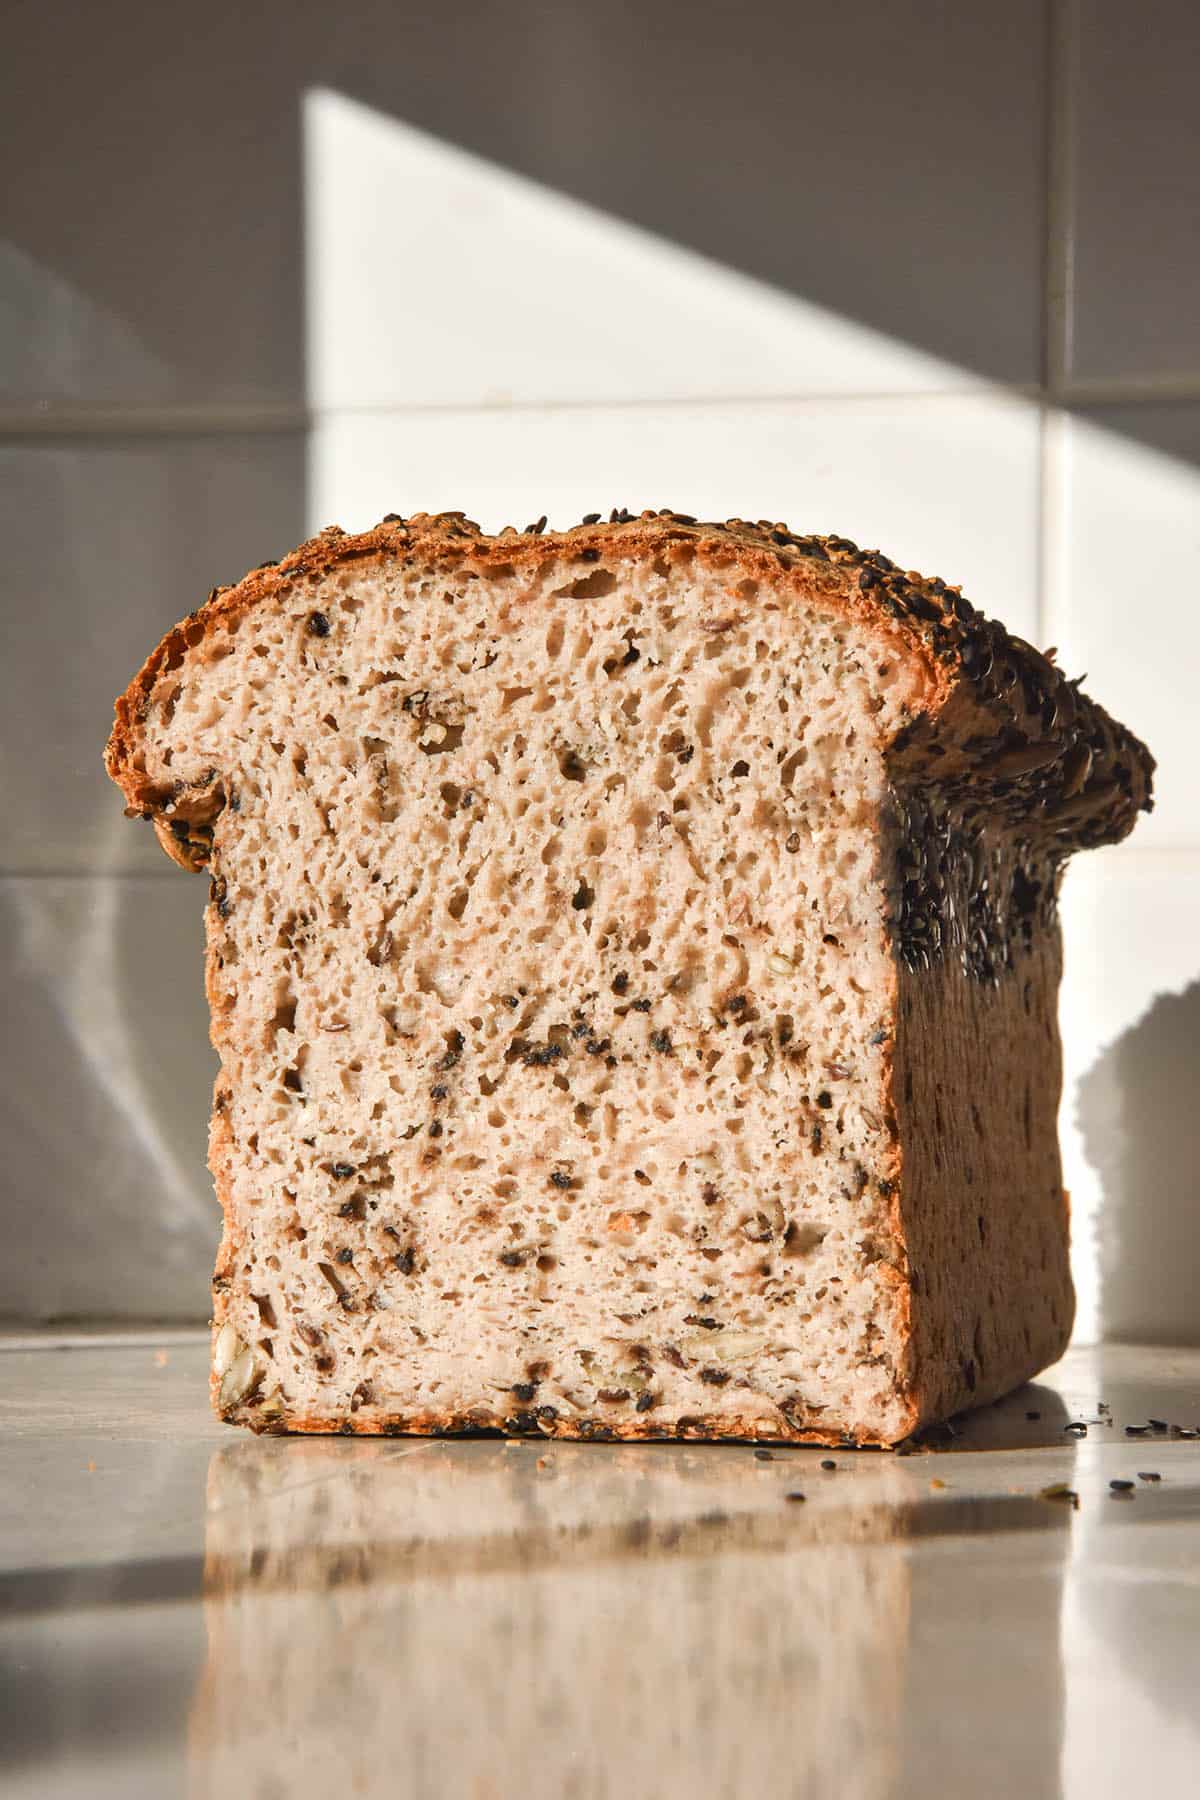 A brightly lit image of a loaf of gluten free seeded bread on a white bench top against a white stone wall. The loaf is filled with seeds and has been sliced to reveal the soft and fluffy inner crumb.